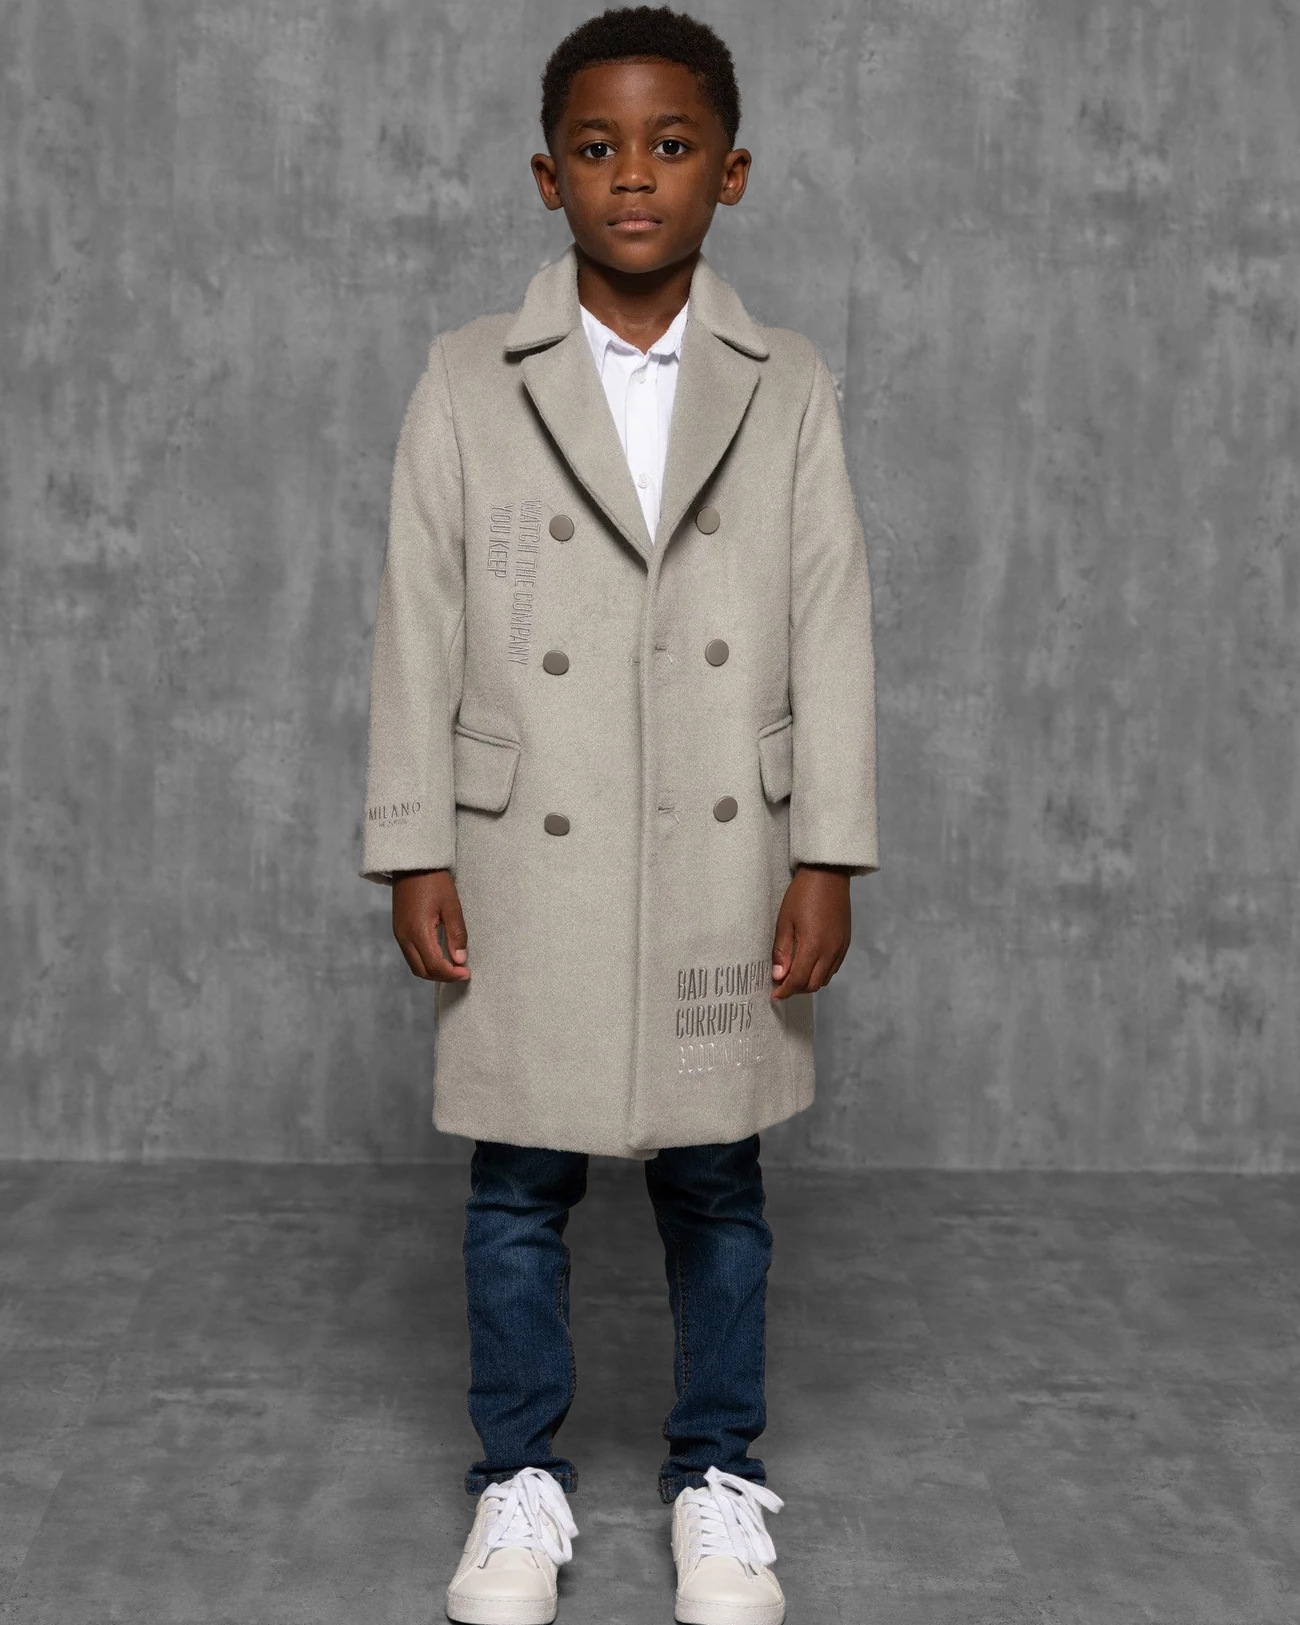 Kids Christian Trench